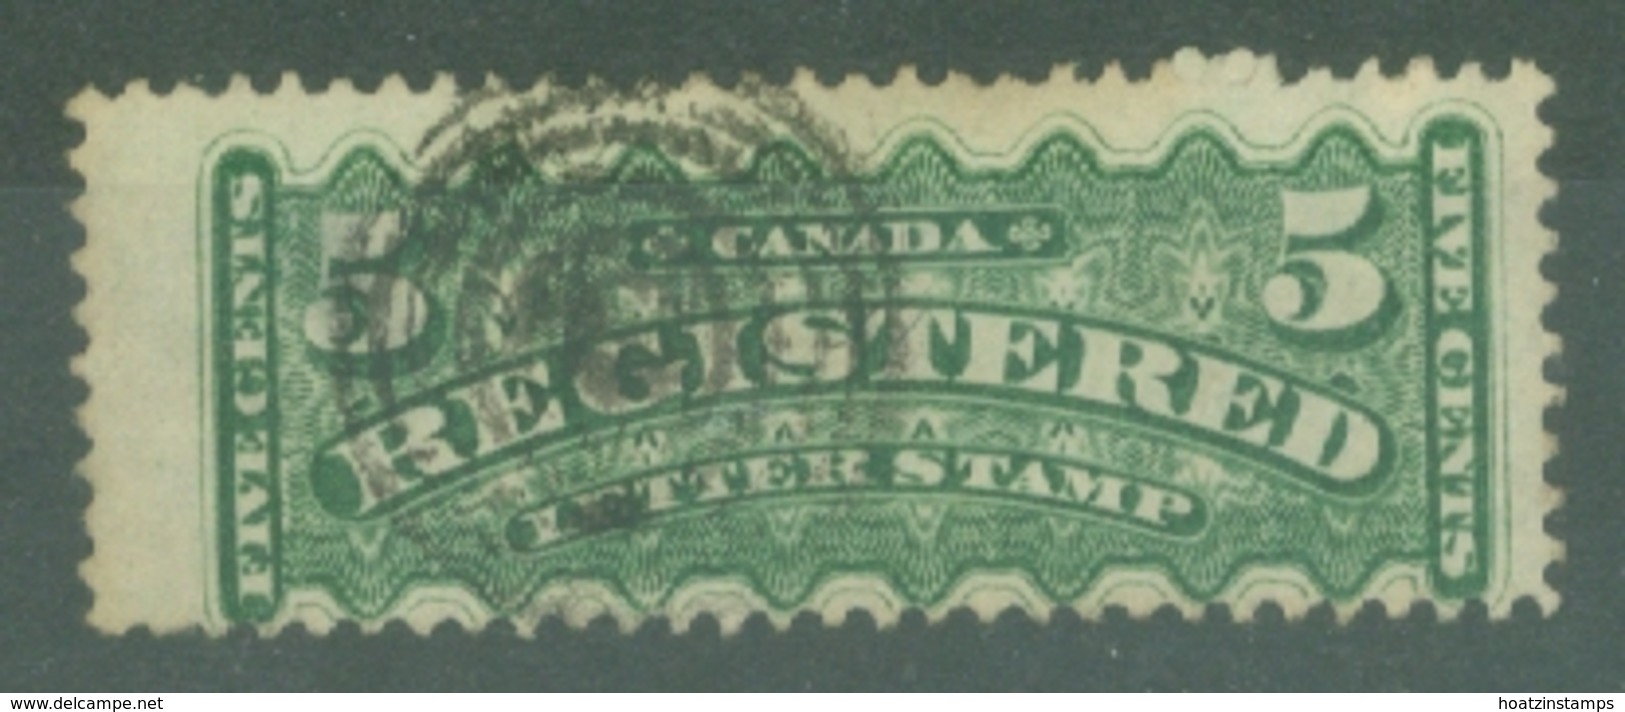 Canada: 1875/92   Registration Stamp   SG R7a    5c   Dull Sea-green   Used - Recommandés